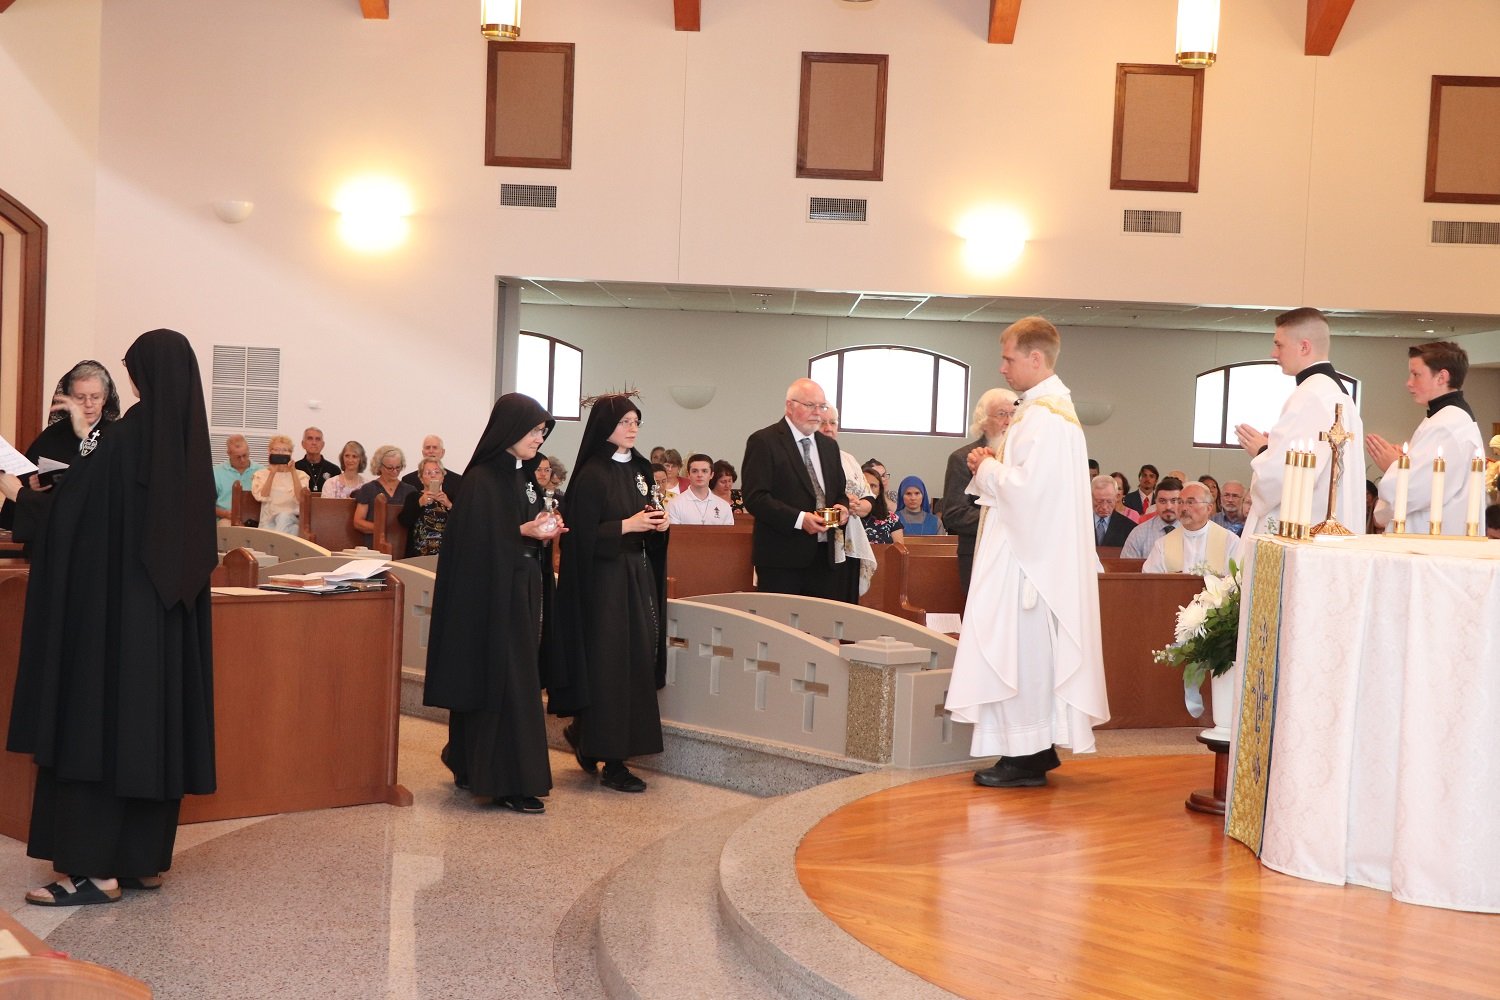  The Offertory procession: Sr. Mary Veronica (Novice Directress), Sr. Frances Marie, and her parents and grandfather bring the gifts to the altar 